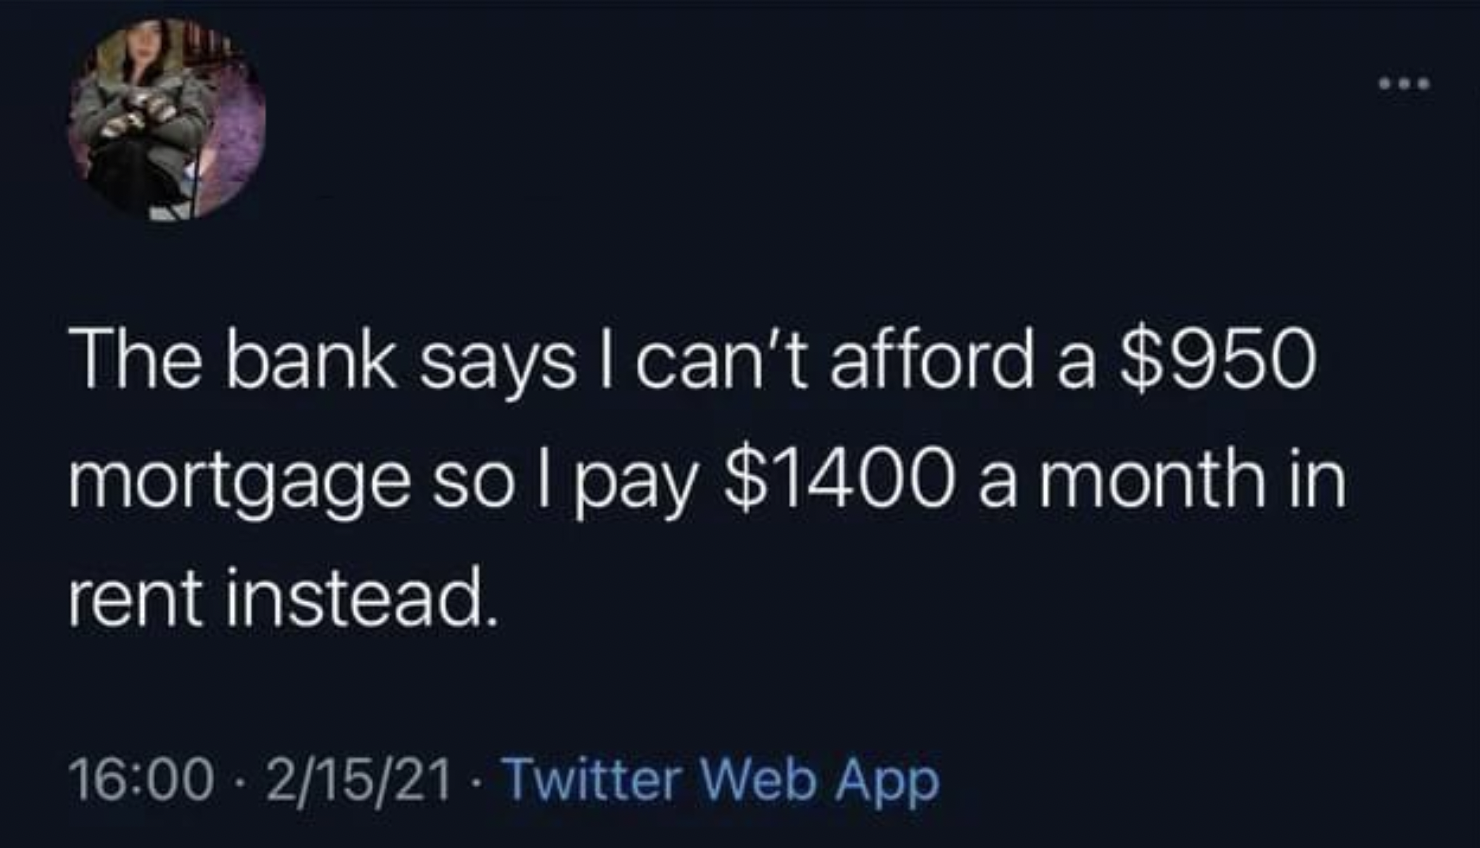 funny fails - bank says i can t afford a $950 mortg - The bank says I can't afford a $950 mortgage so I pay $1400 a month in rent instead